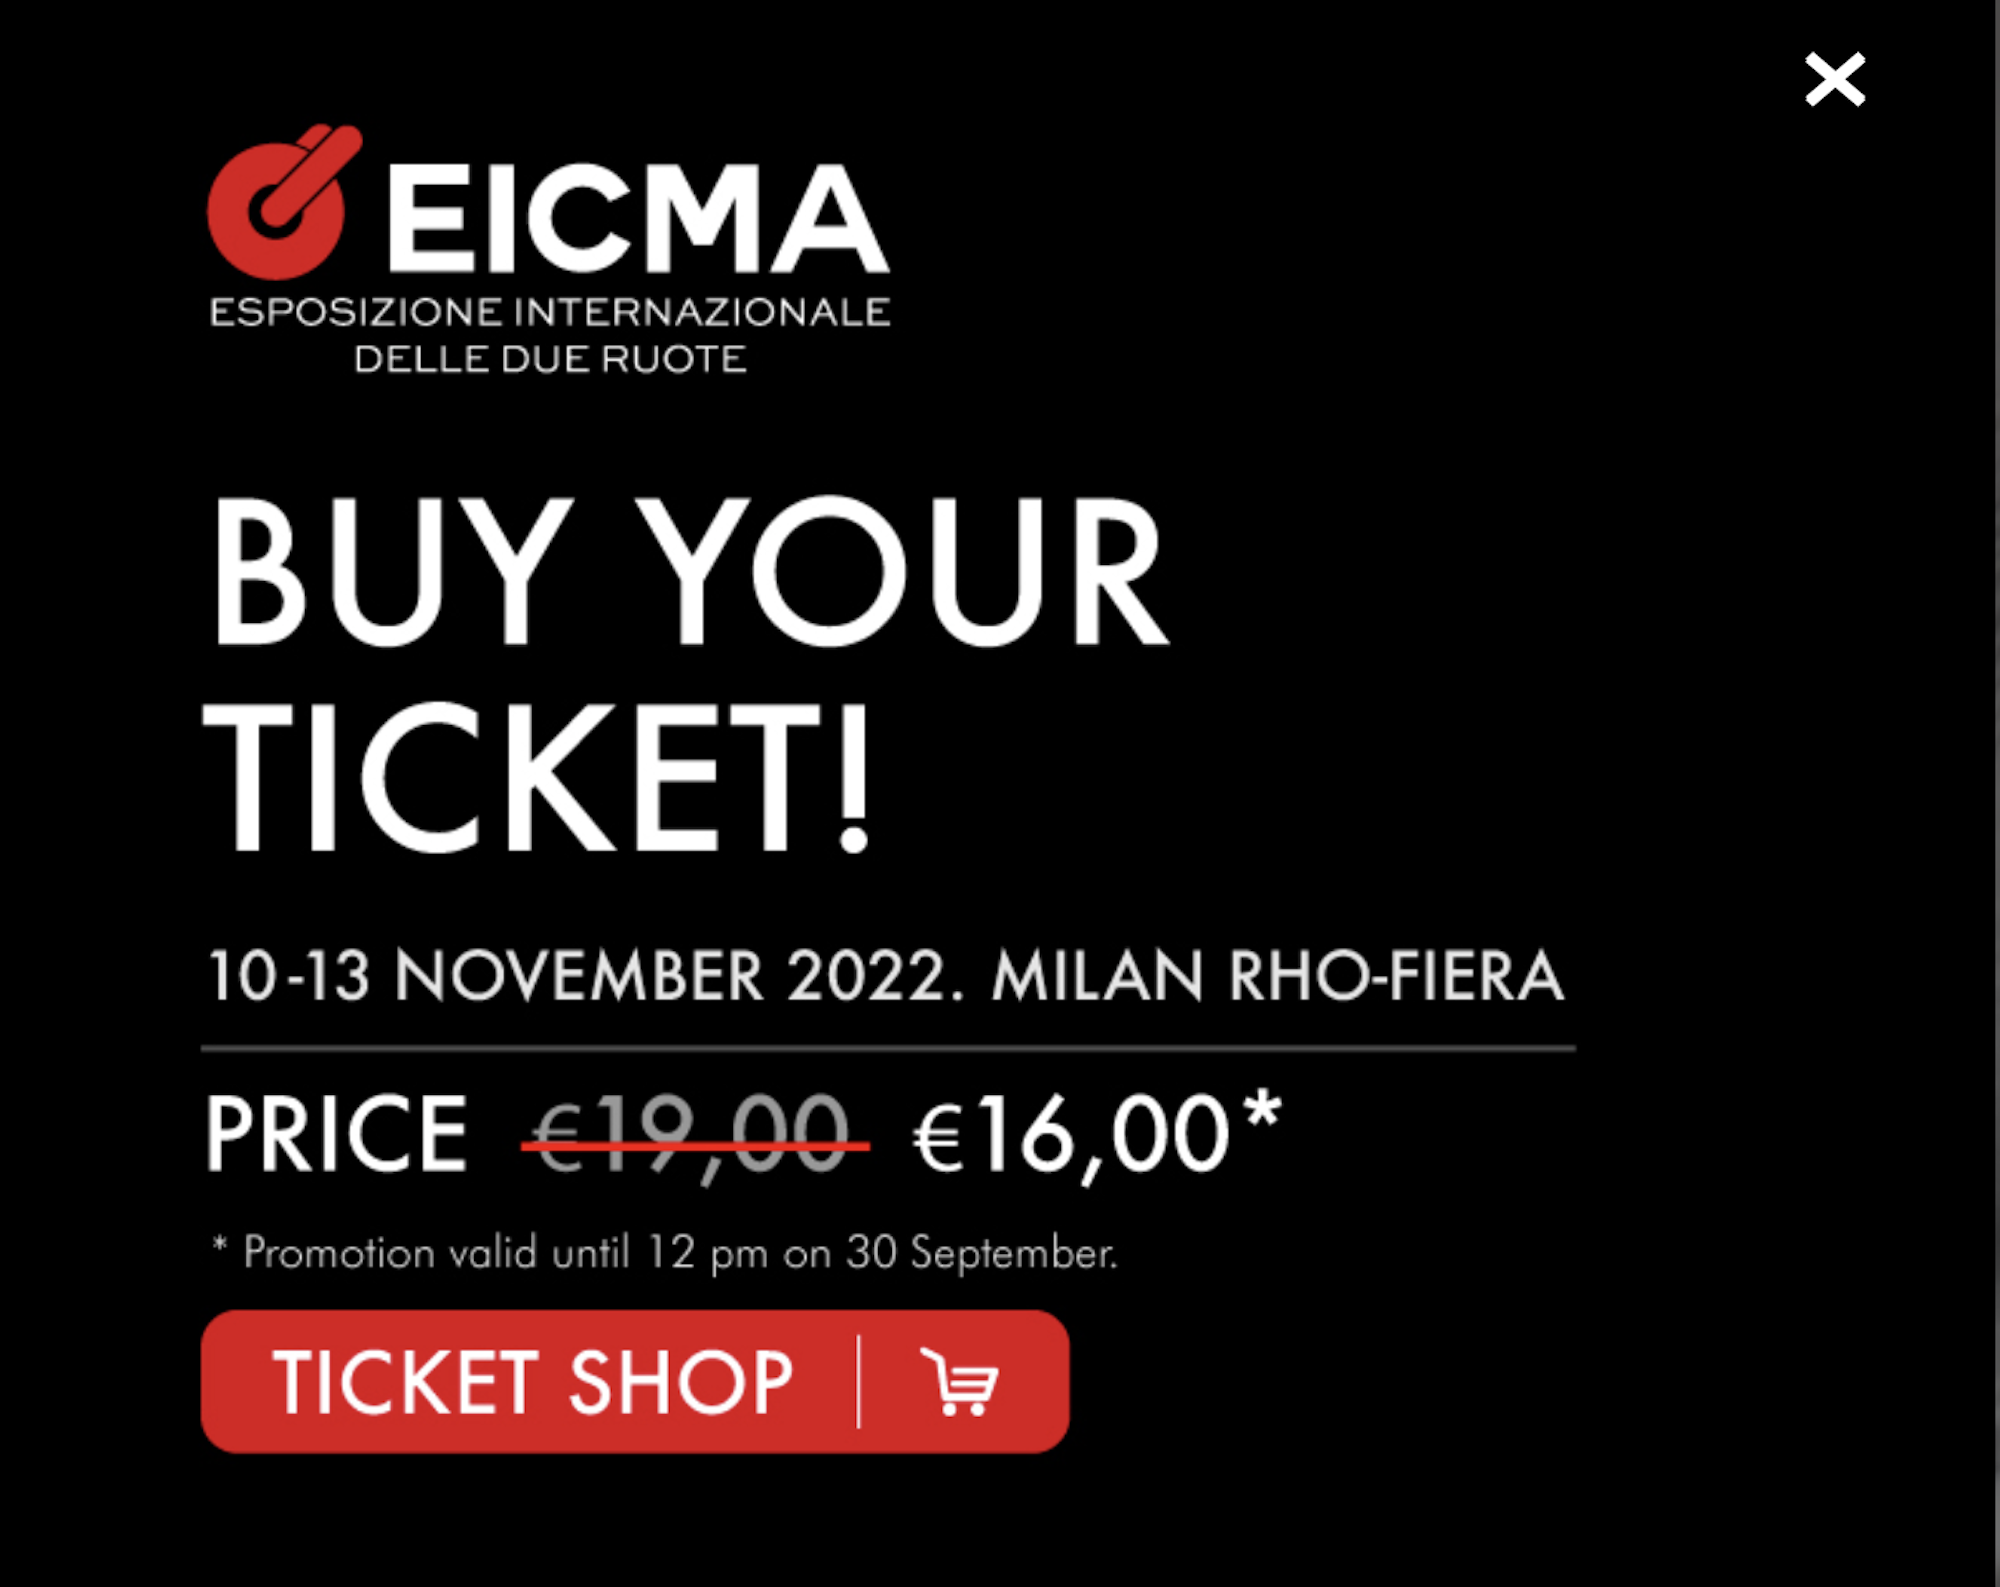 EICMA tickets are on sale until the end of September!  Media from EICMA. 